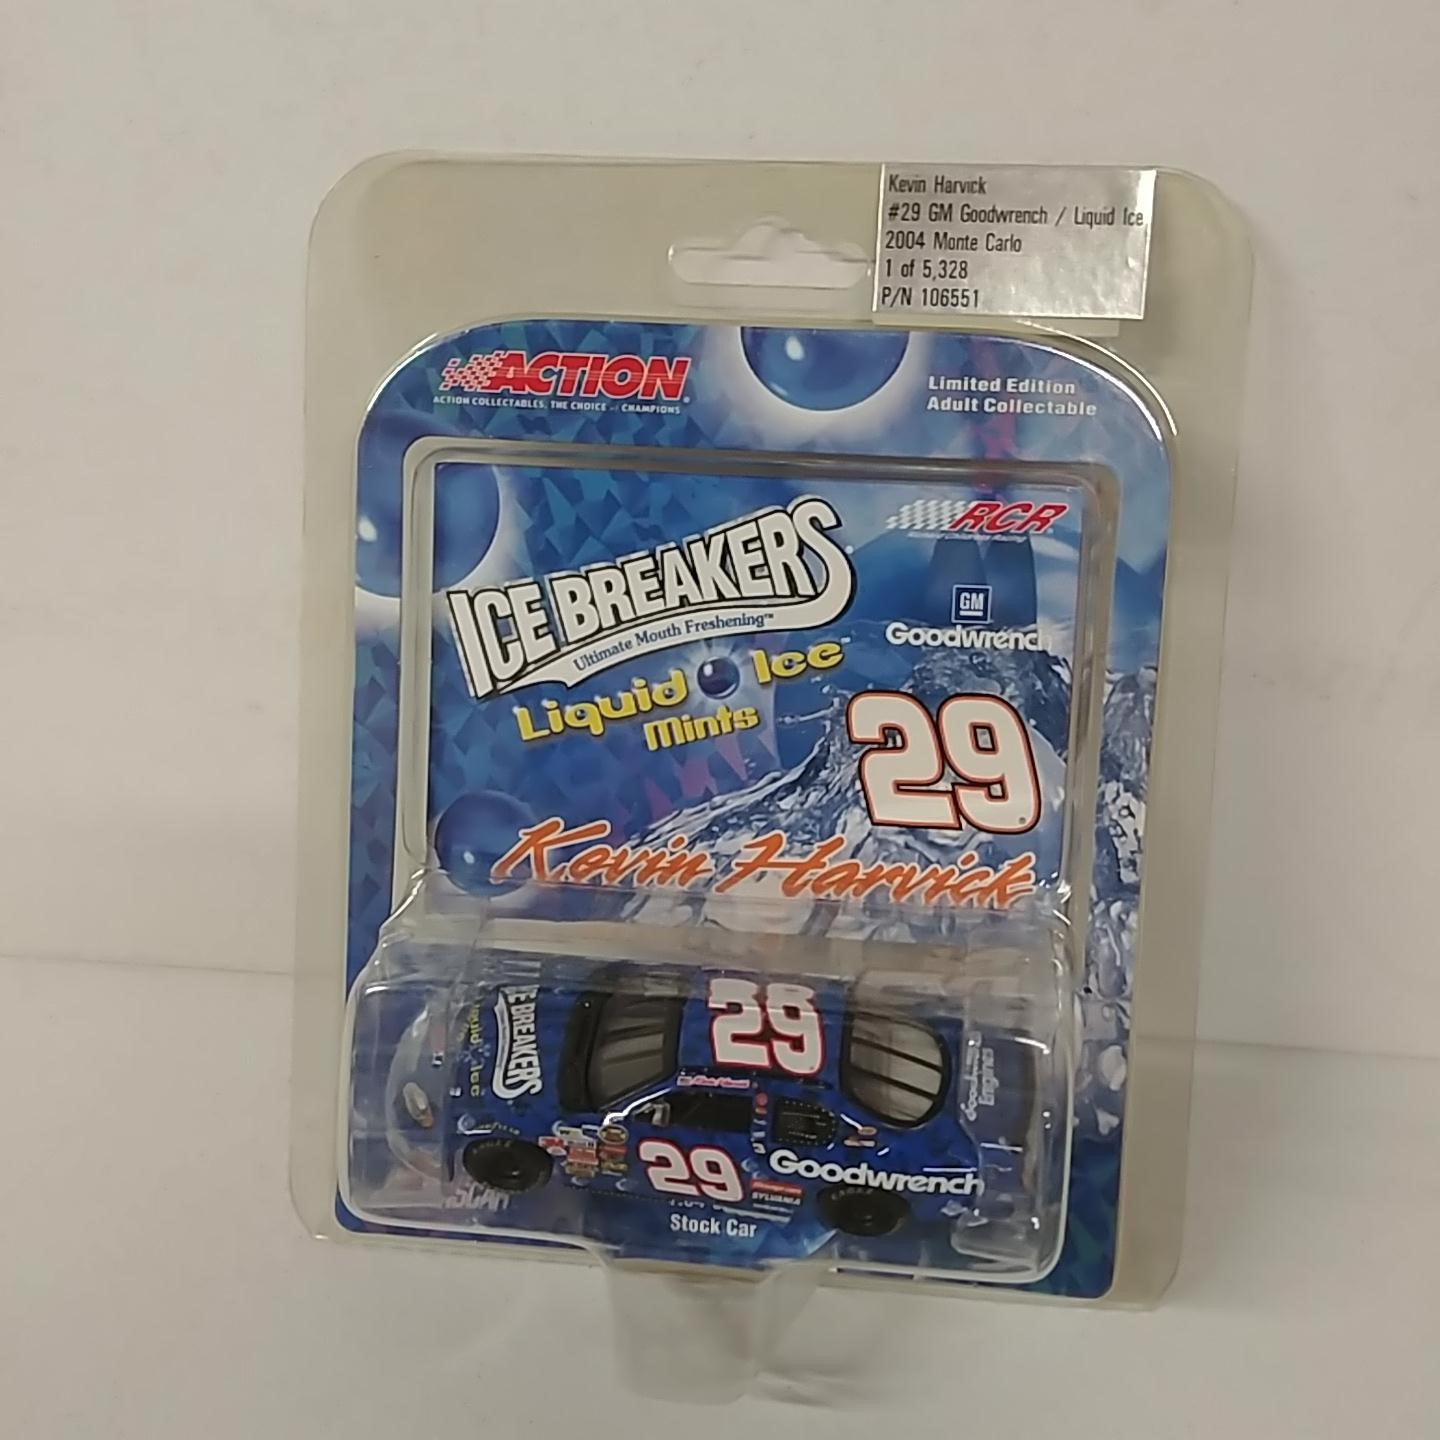 2004 Kevin Harvick 1/64th Goodwrench "Ice Breakers Liquid Ice" car